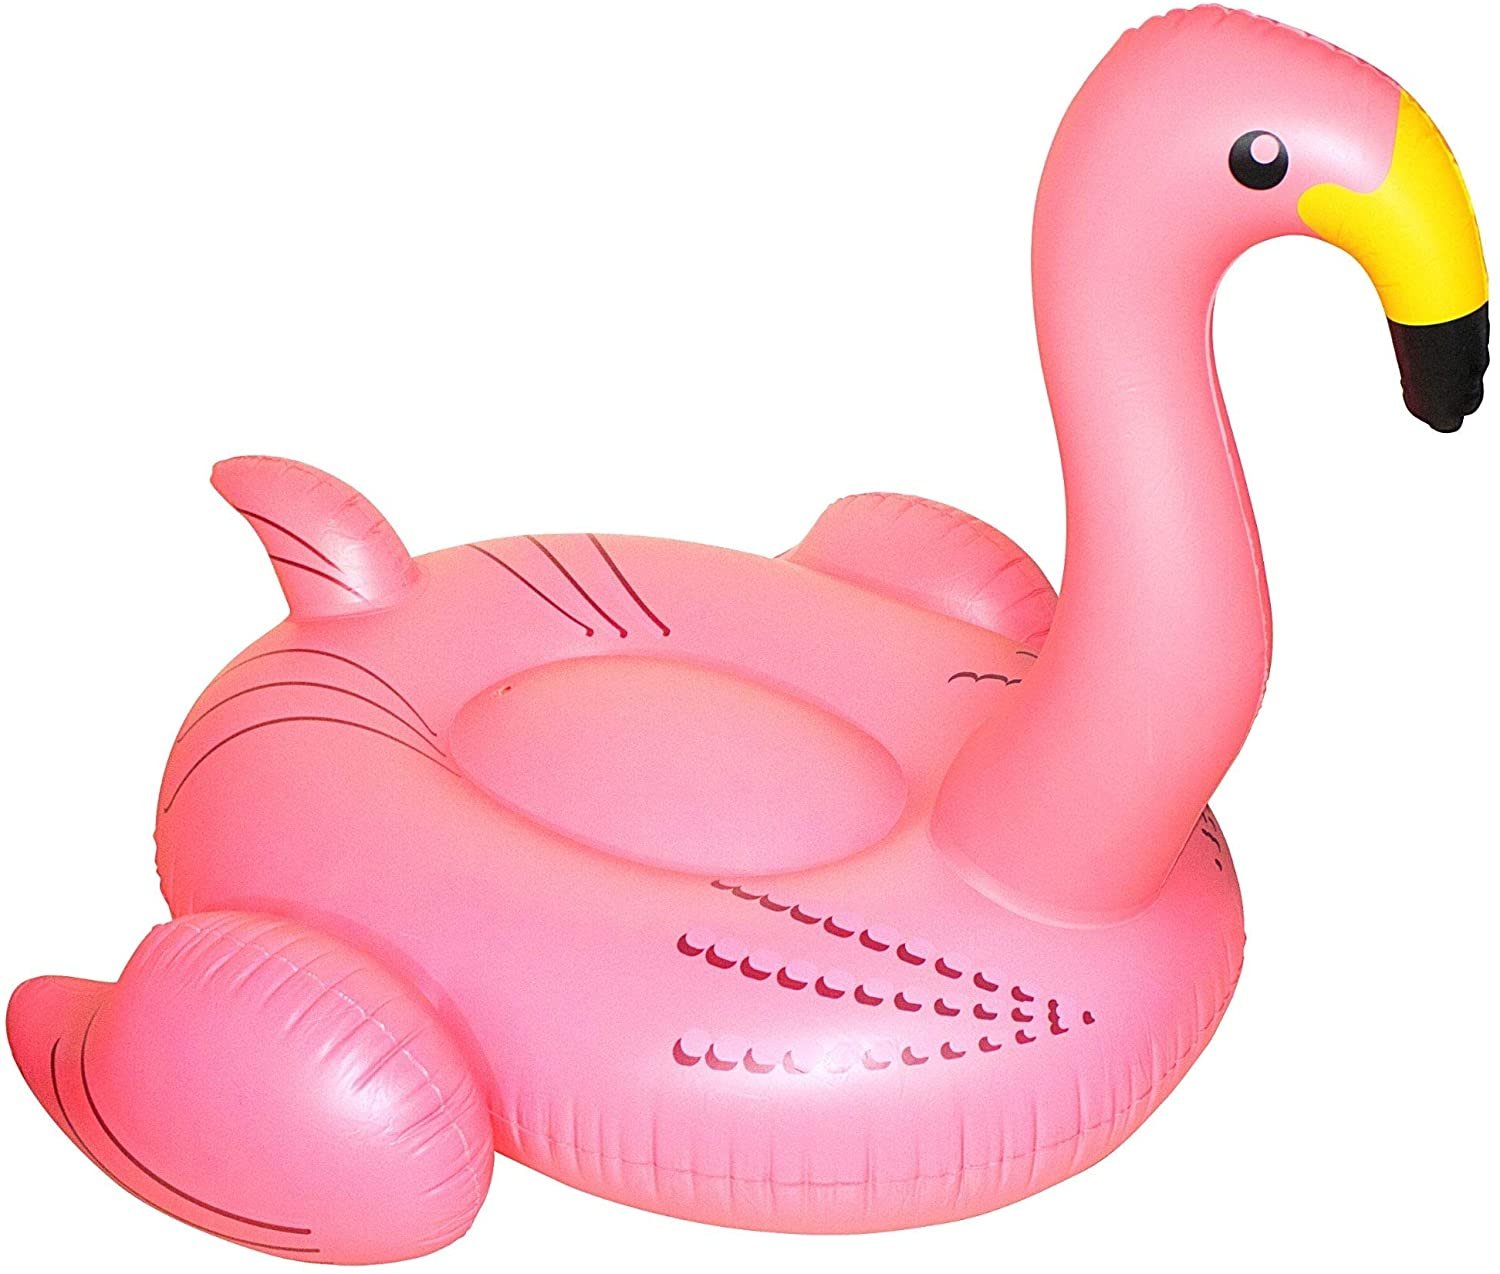 Swimline Giant Flamingo Inflatable Pool Float - Pink, 1-Pack, Size AVAILABLE - Free Shipping